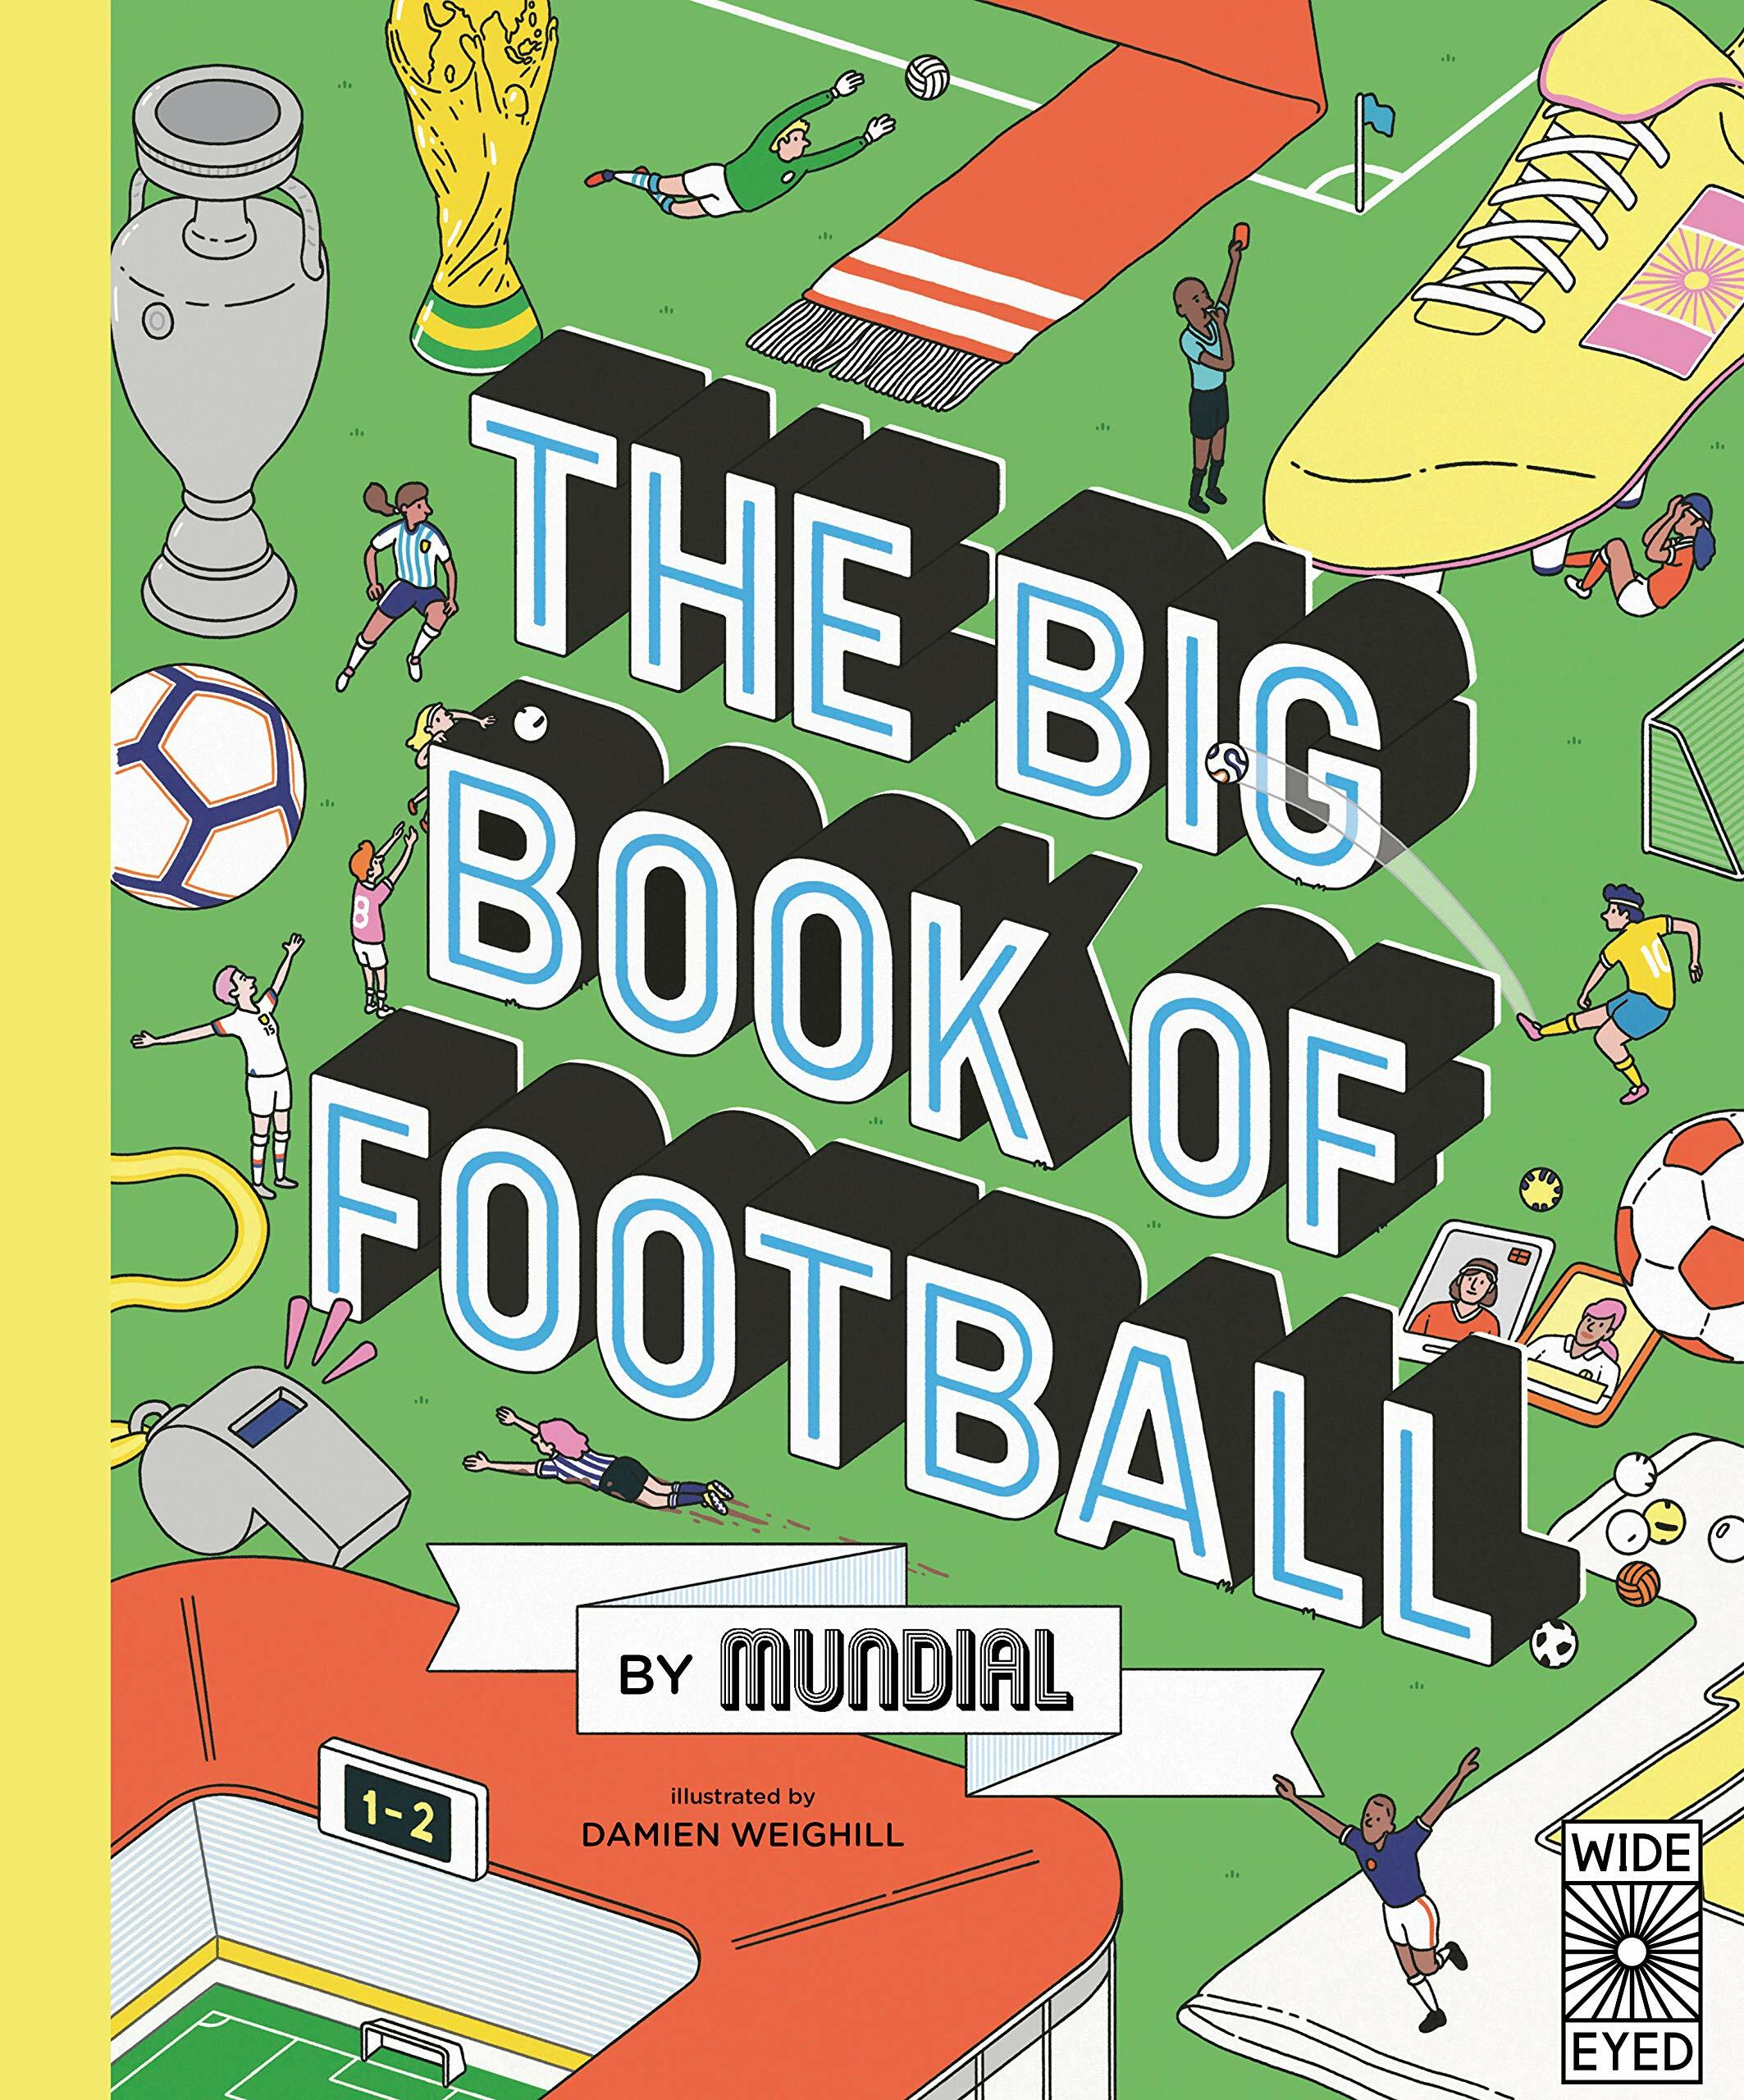 The Big Book of Football by Mundial (Hardcover)